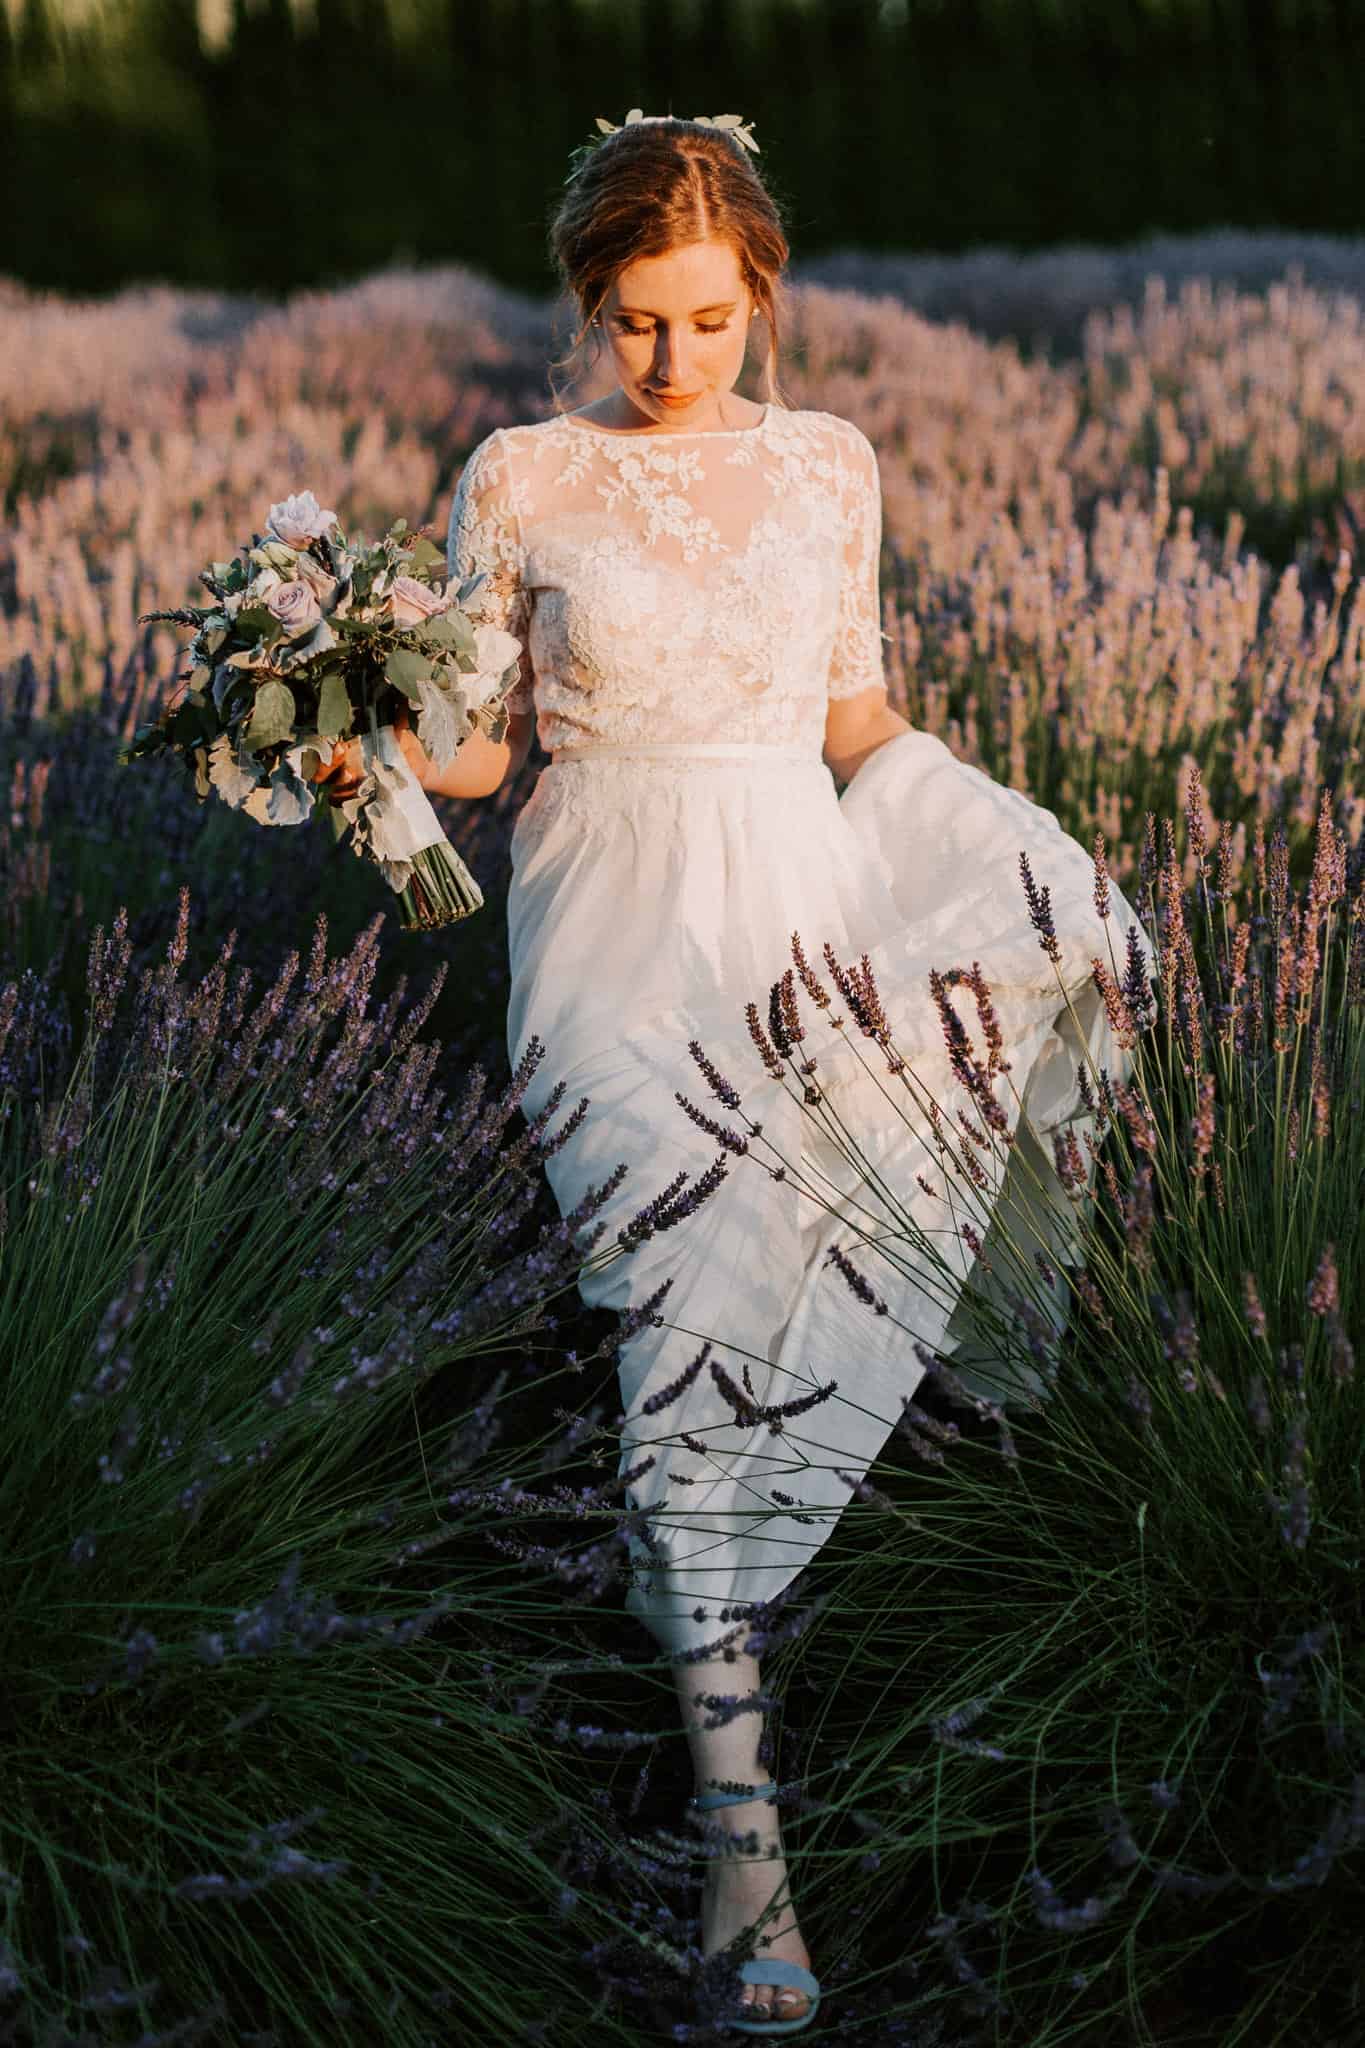 Woodinville Lavender Farm wedding venue at sunset by Kyle Goldie of Luma Weddings